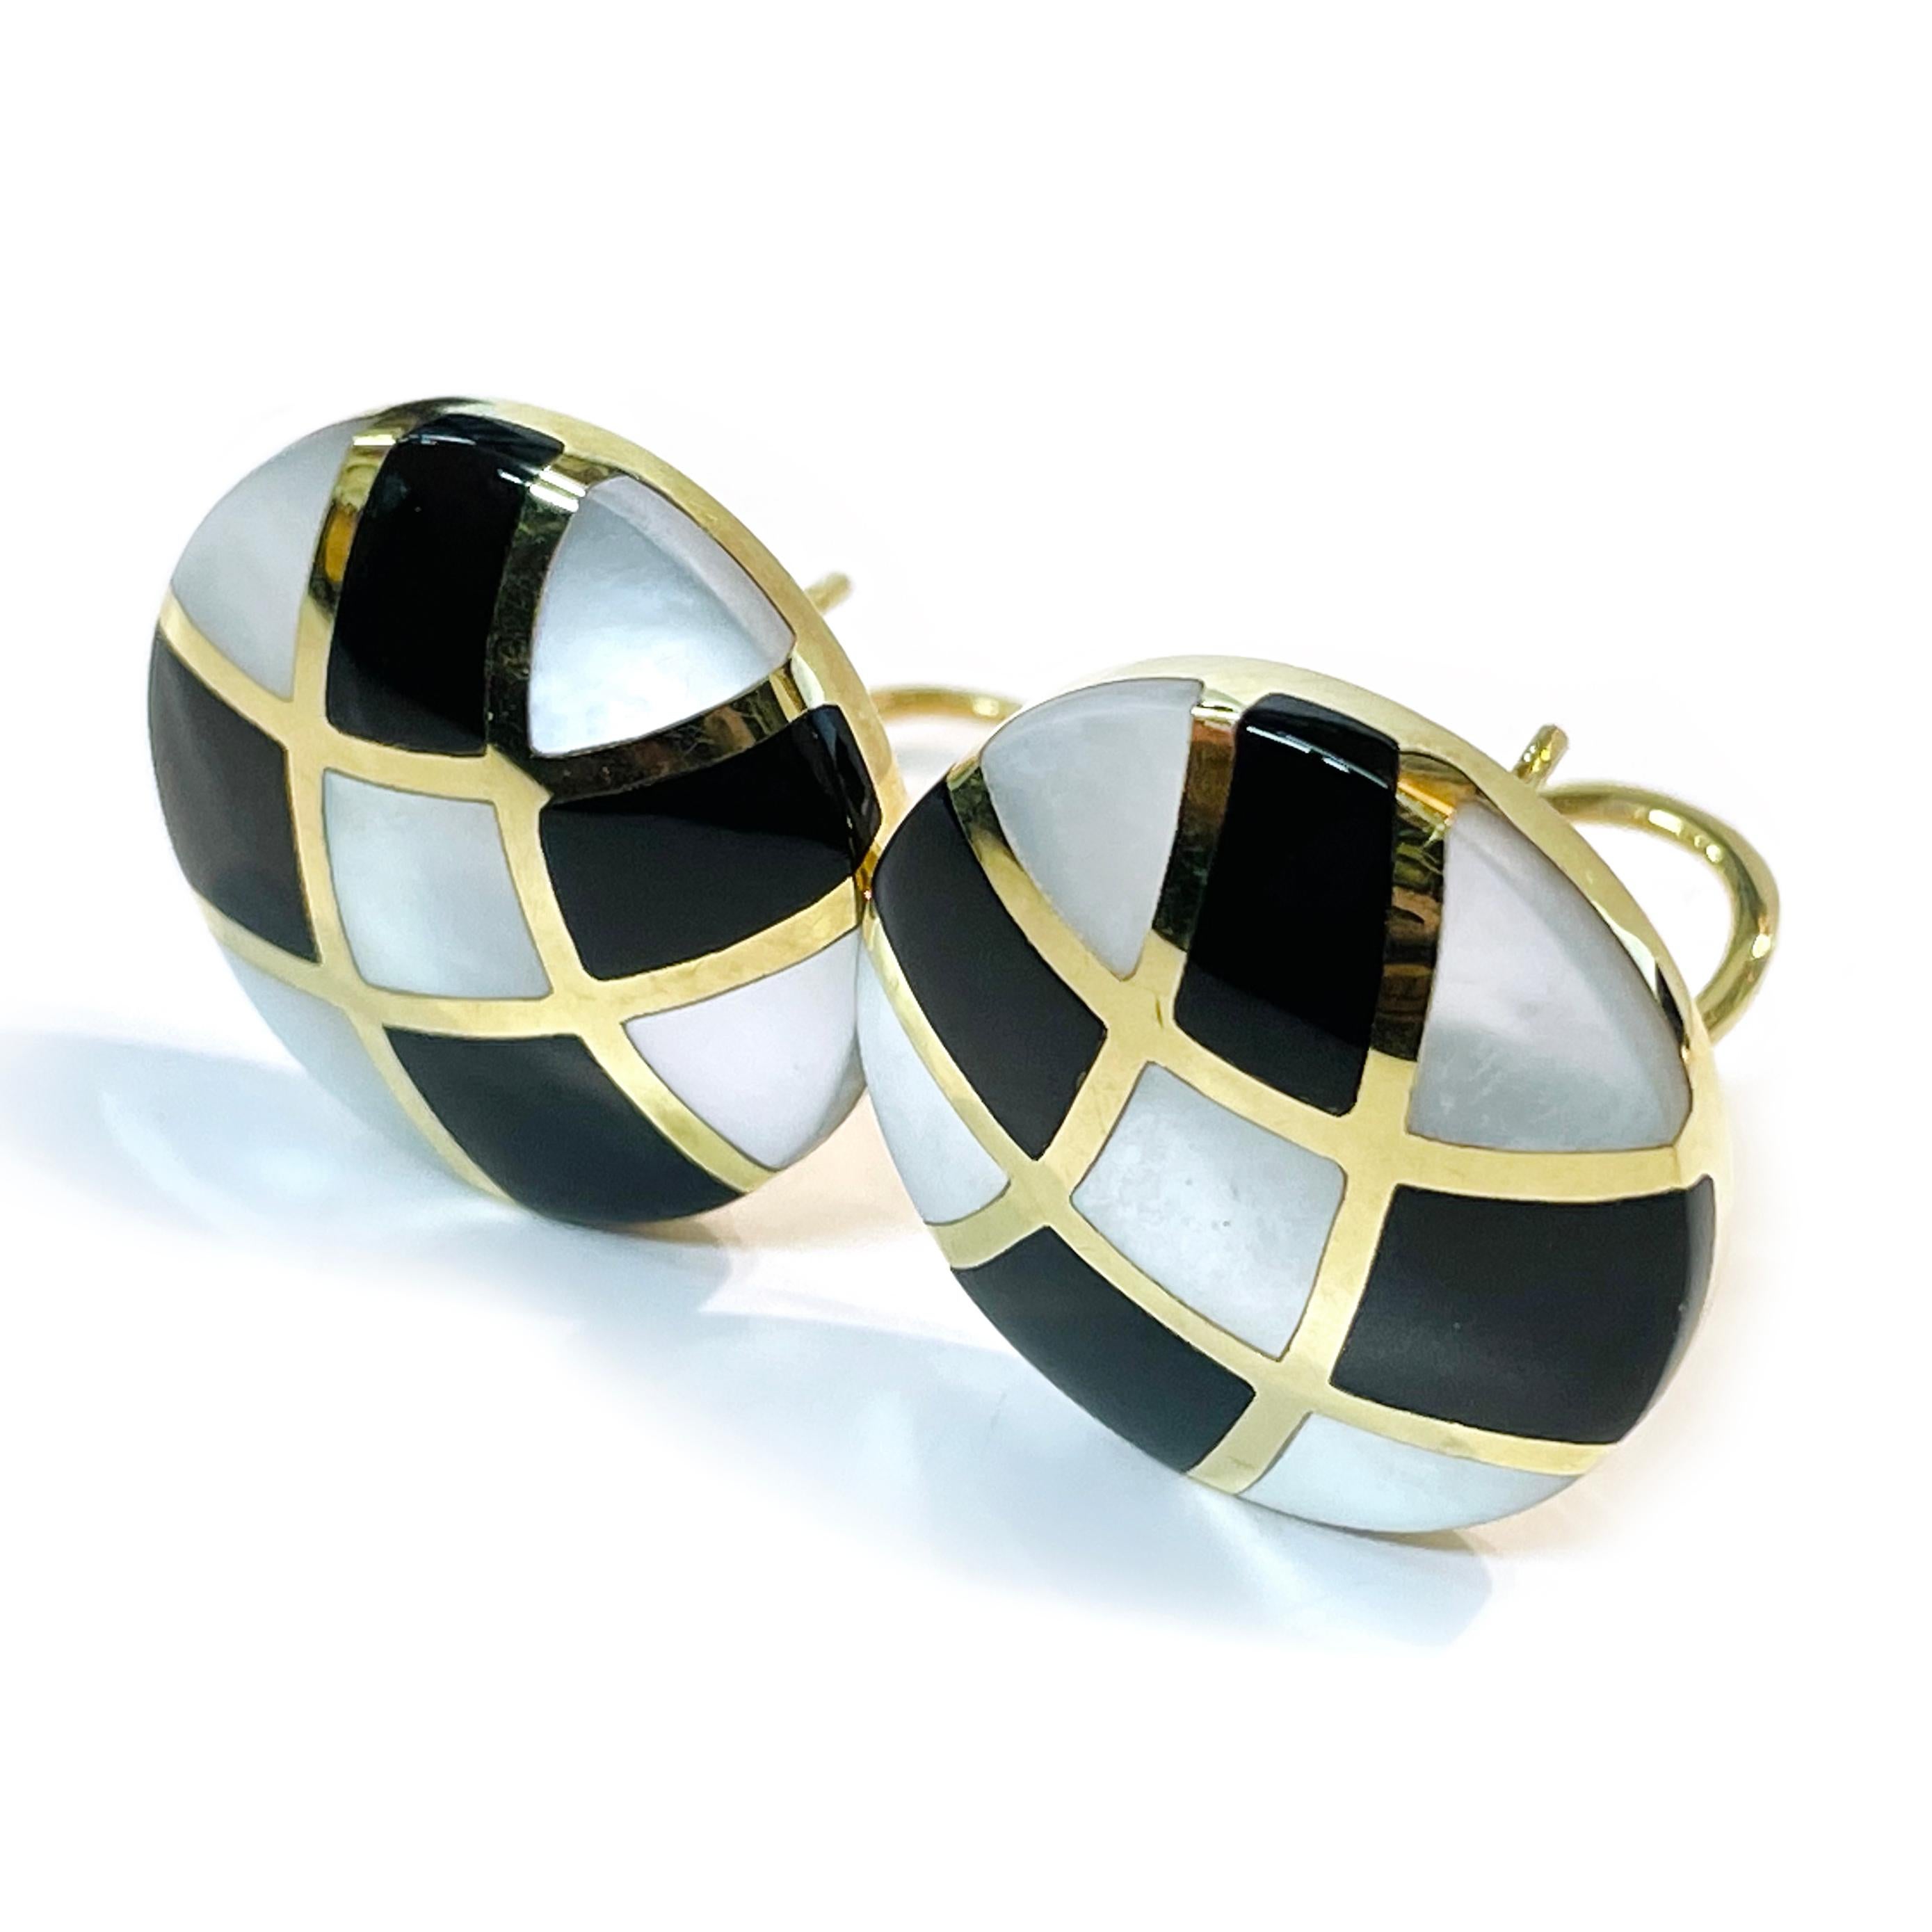 Asch/Grossbardt 14 Karat Yellow Gold Mother of Pearl Onyx Earrings. The earrings feature a curved checkered pattern of mother of pearl and onyx with swooshes of gold. The earrings have a post and Omega clip back. Each earring measures 21.5mm in